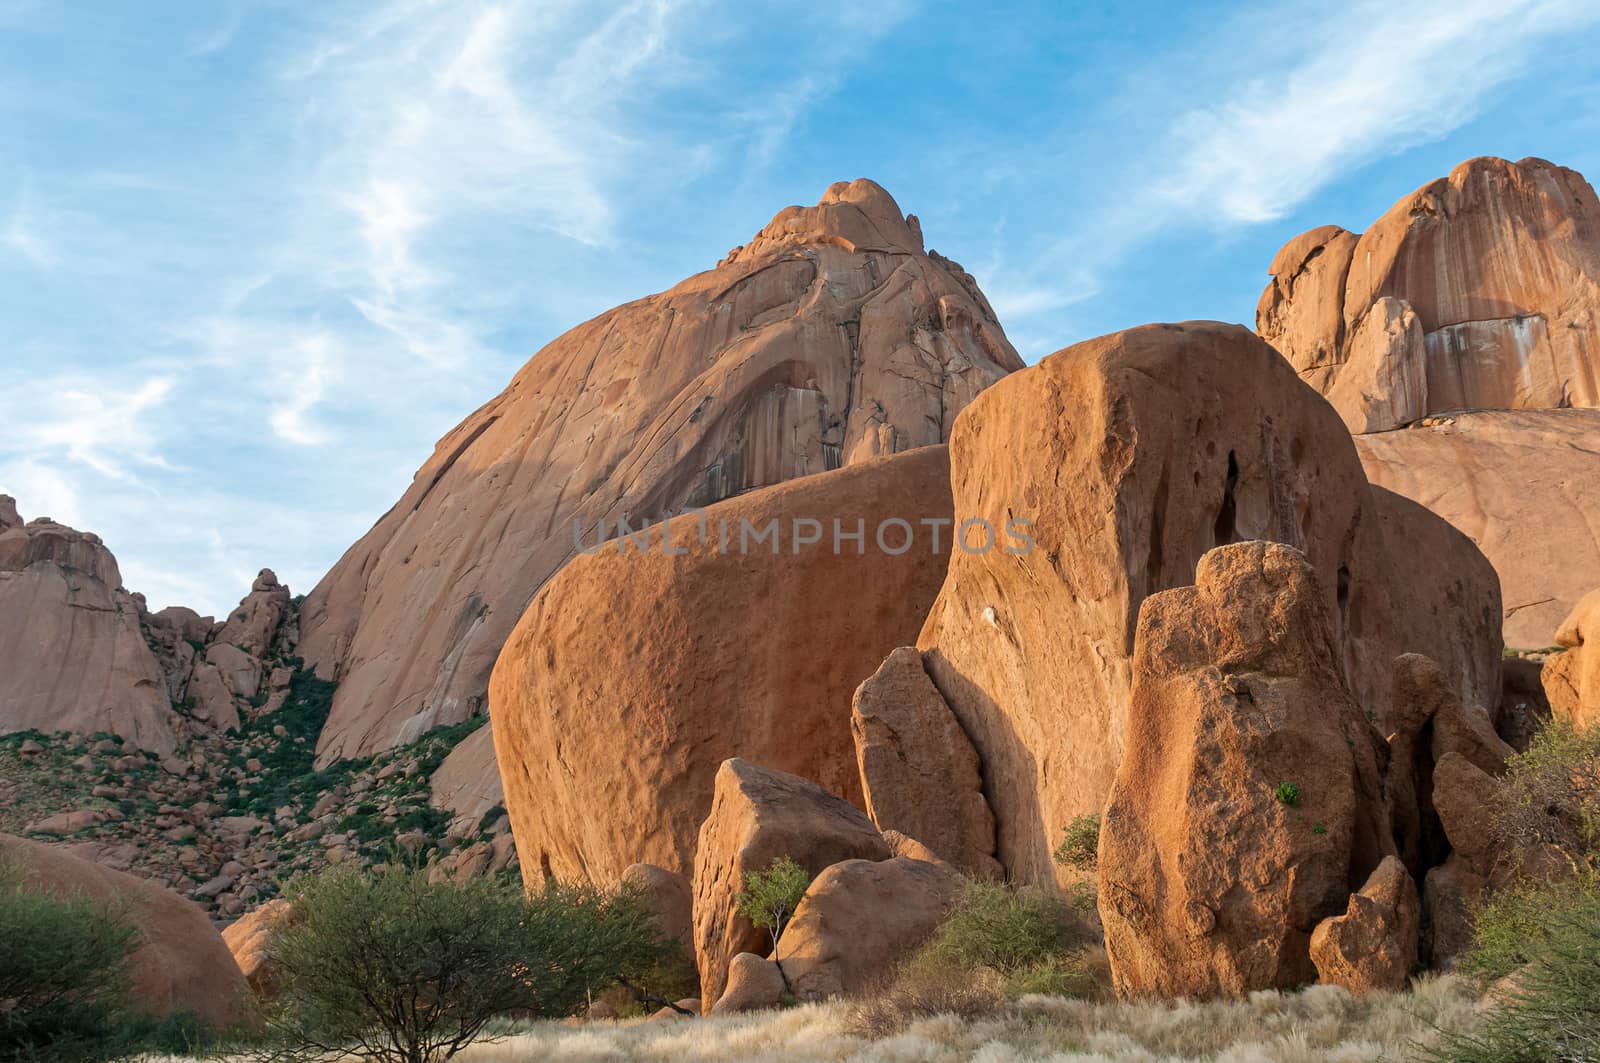 Granite boulders with the greater Spitzkop in the back by dpreezg